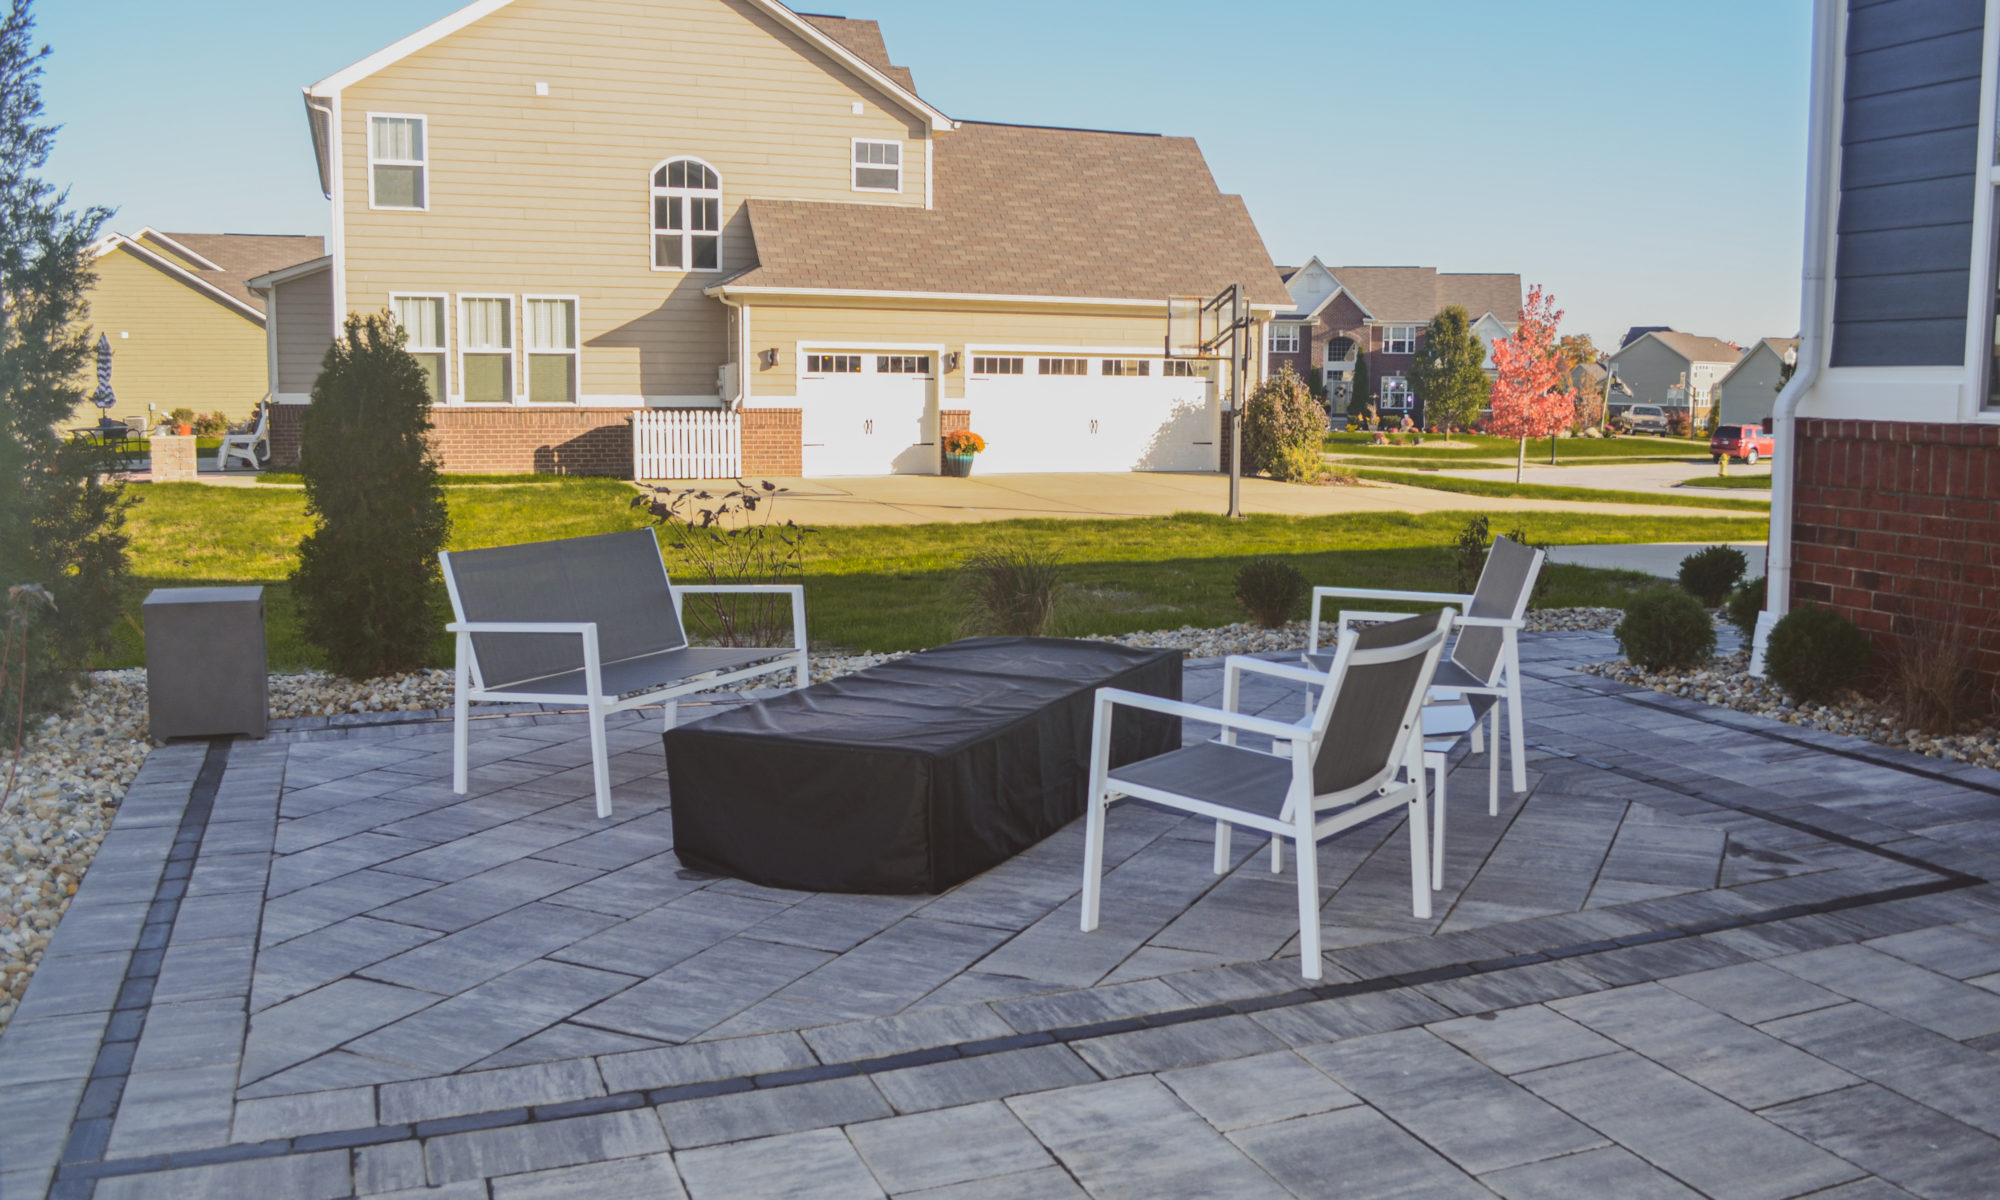 Precision Outdoors Classic Paver and firepit gable roof structure linear gas firepit paver patio custom landscaping Greenwood Indiana